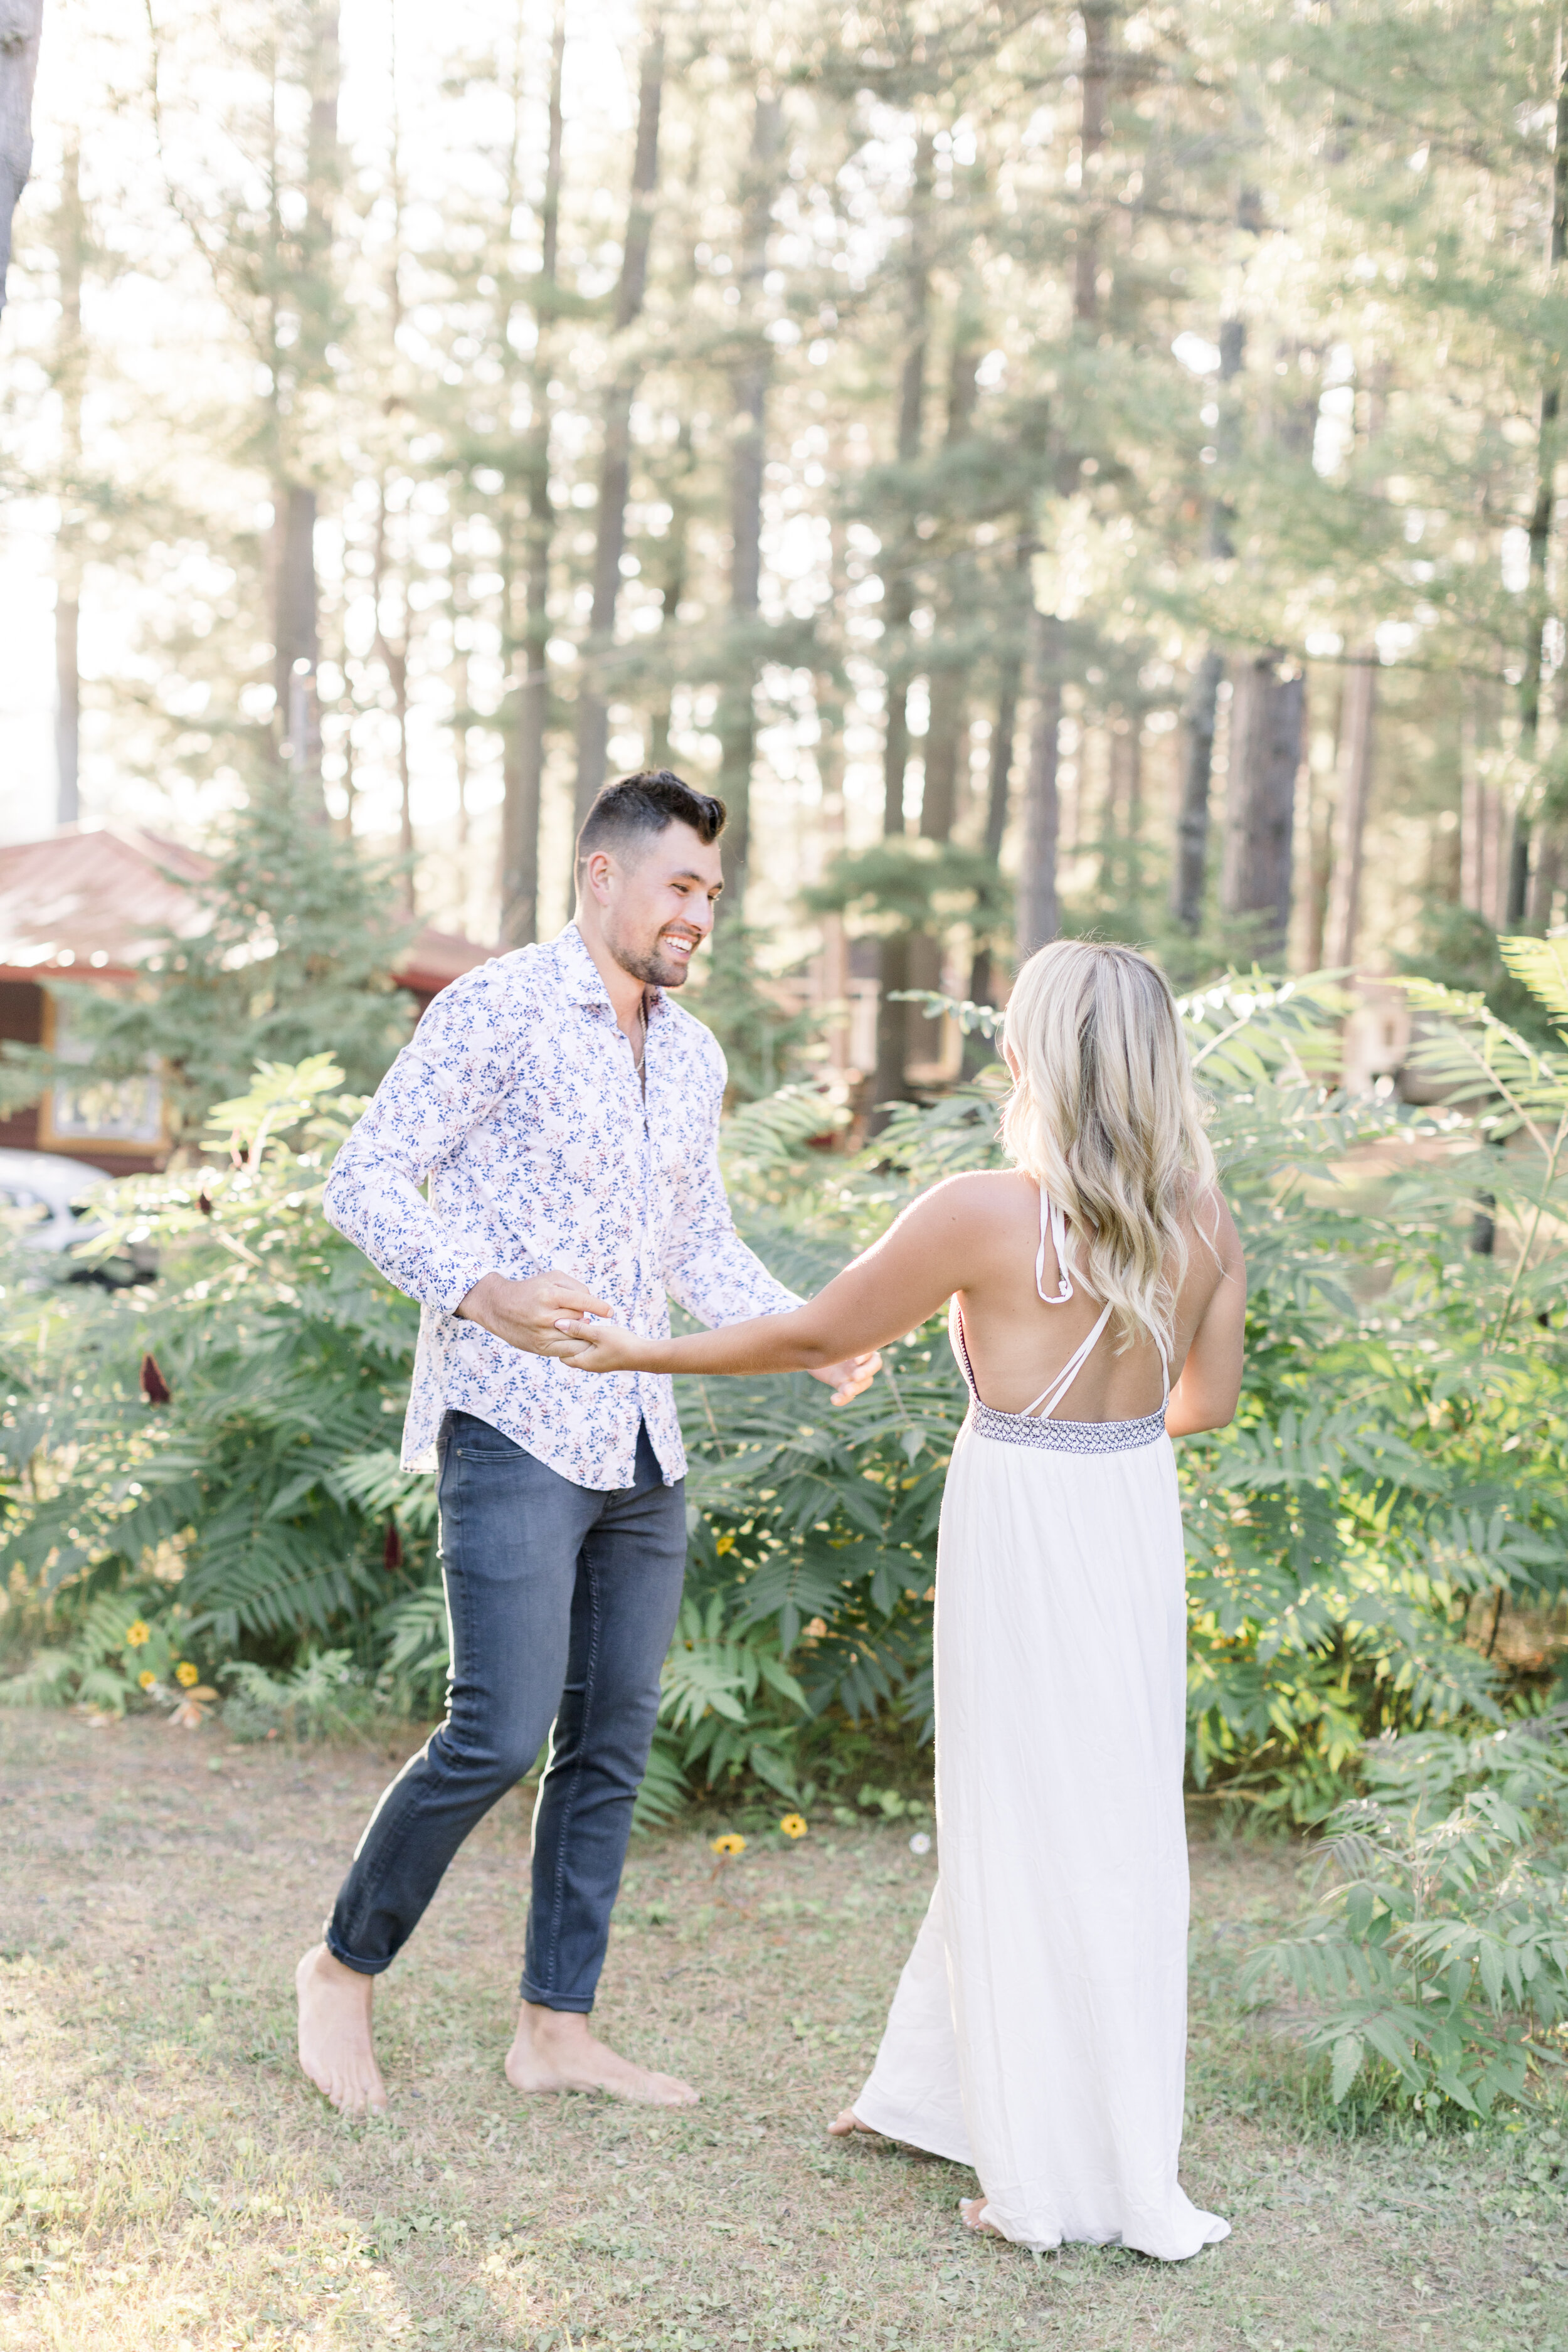  Barefoot couple dancing playfully in the forest for their quebec engagement sessions at sunset at a lakeside cottage. Quebec engagement session locations dancing poses for engagement posing inspo for engagement photography best quebec photographer f